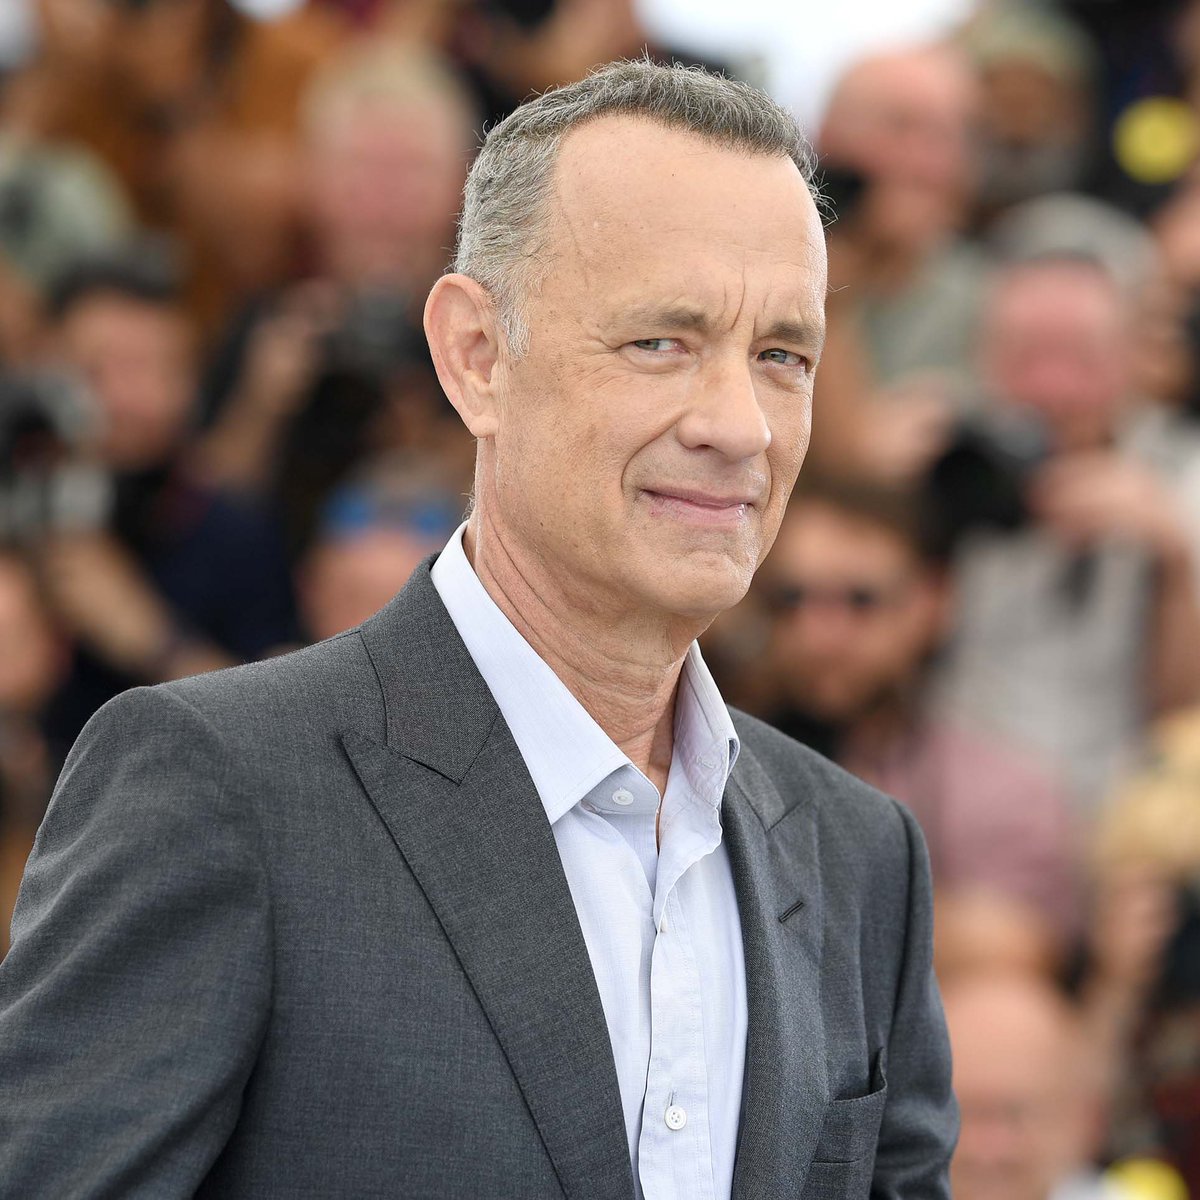 🚨⚠️BREAKING: Massive rumors are spreading about a potential investigation into Tom Hanks regarding allegations of pedophiIia.

Additionally, he has disabled comments on his Instagram account due to tens of thousands of people calling him out.

Do you think Tom Hanks is guilty?